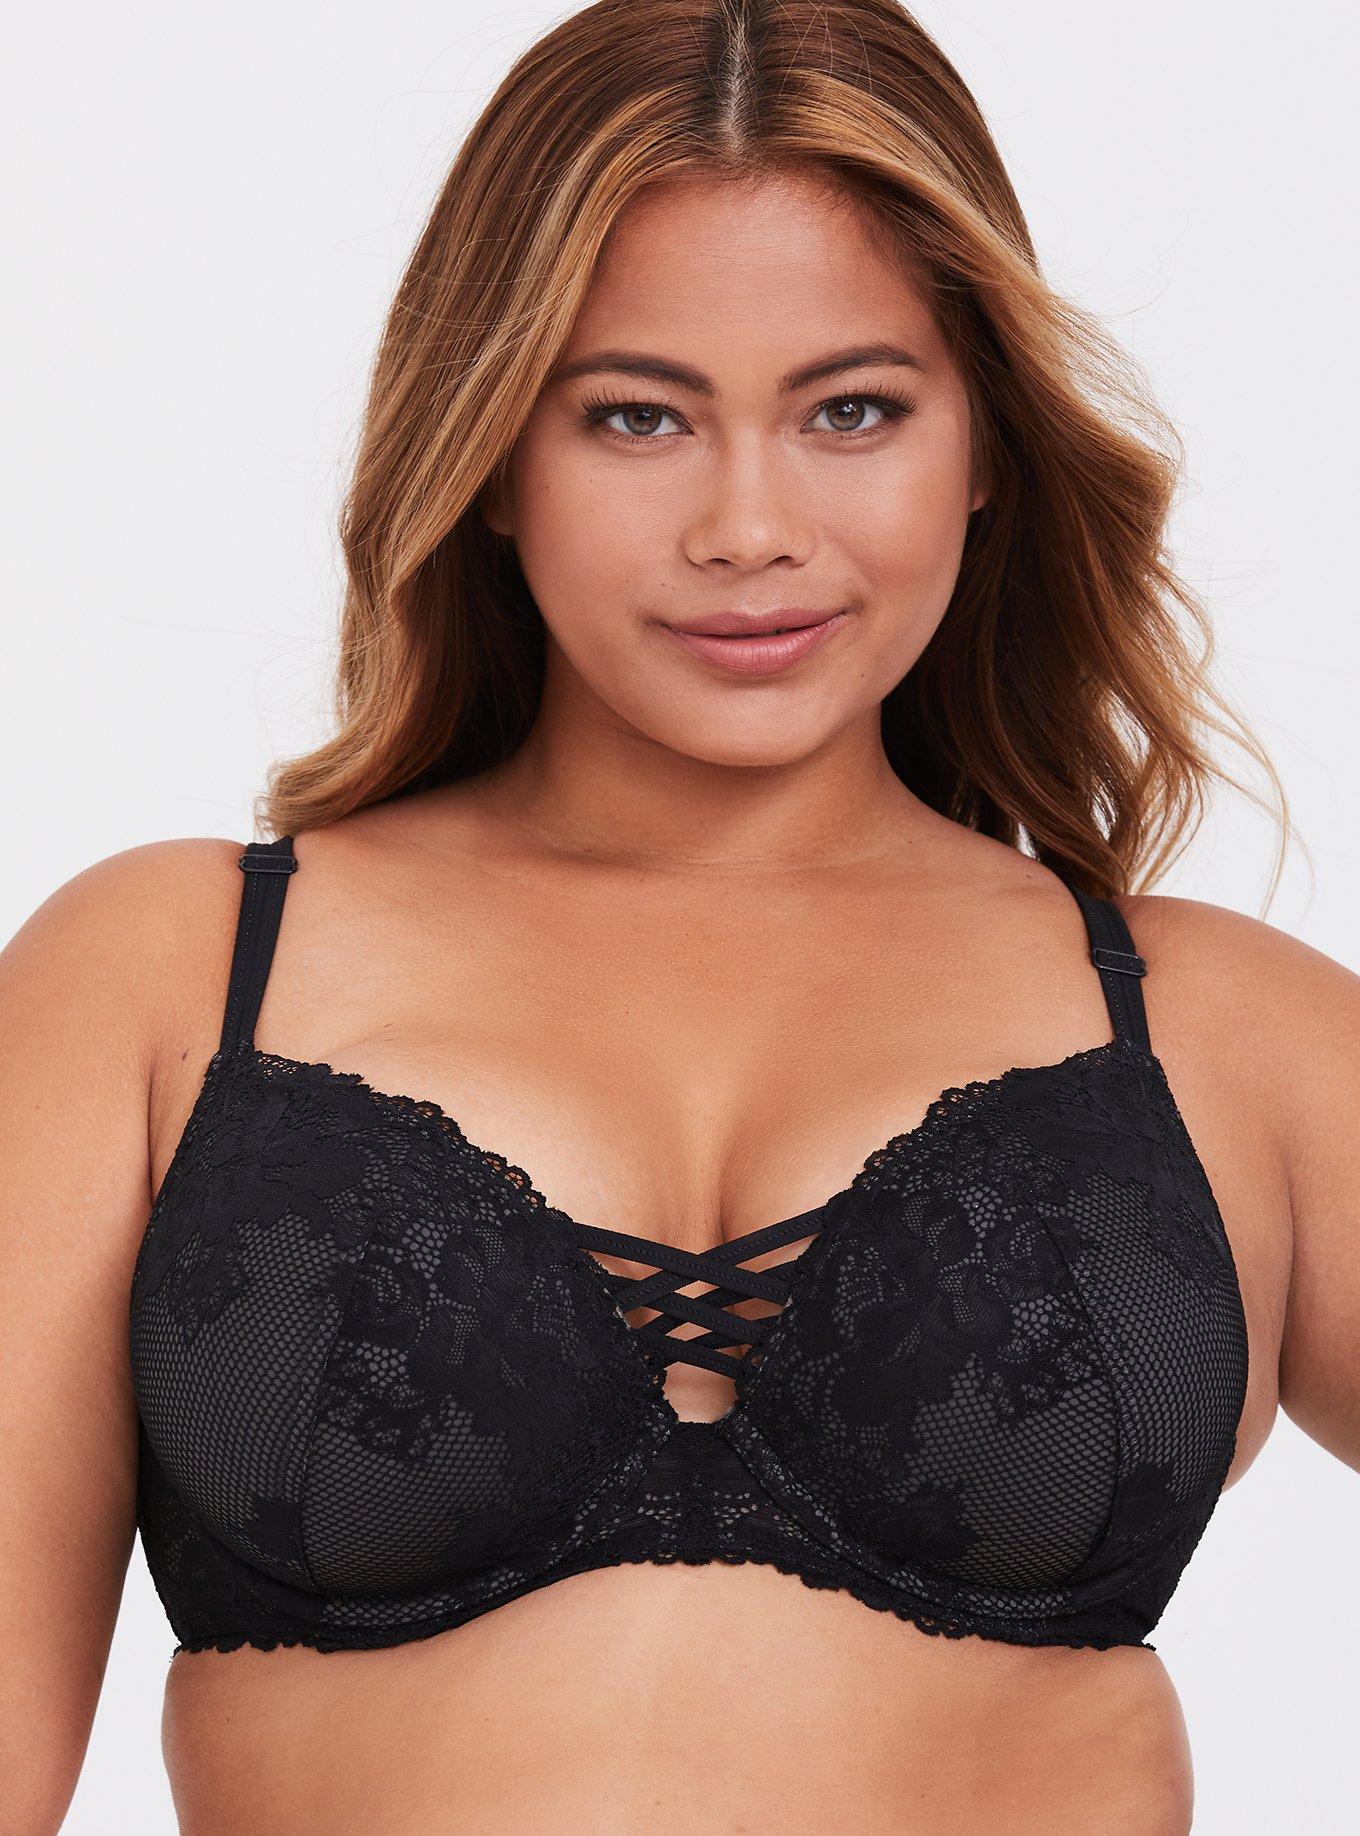 Torrid Push Up Plunge Bra Size 42D NWT - $40 New With Tags - From Jamie